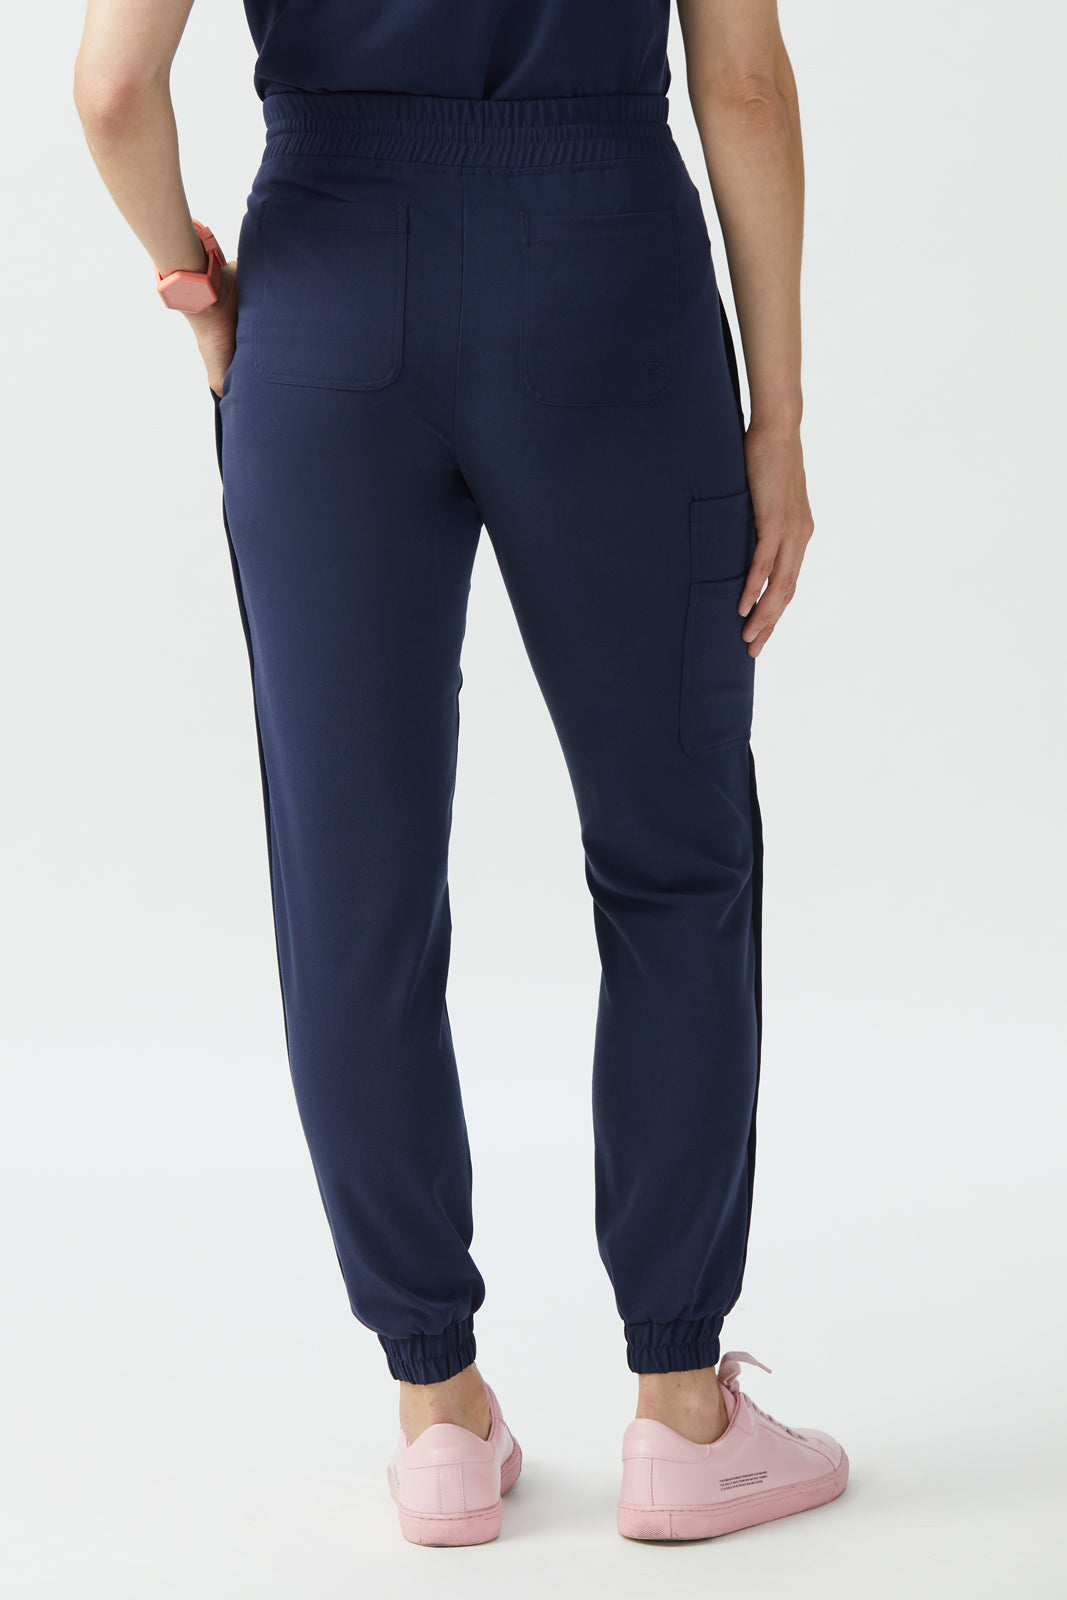 Navy Blue Joggers for Women 